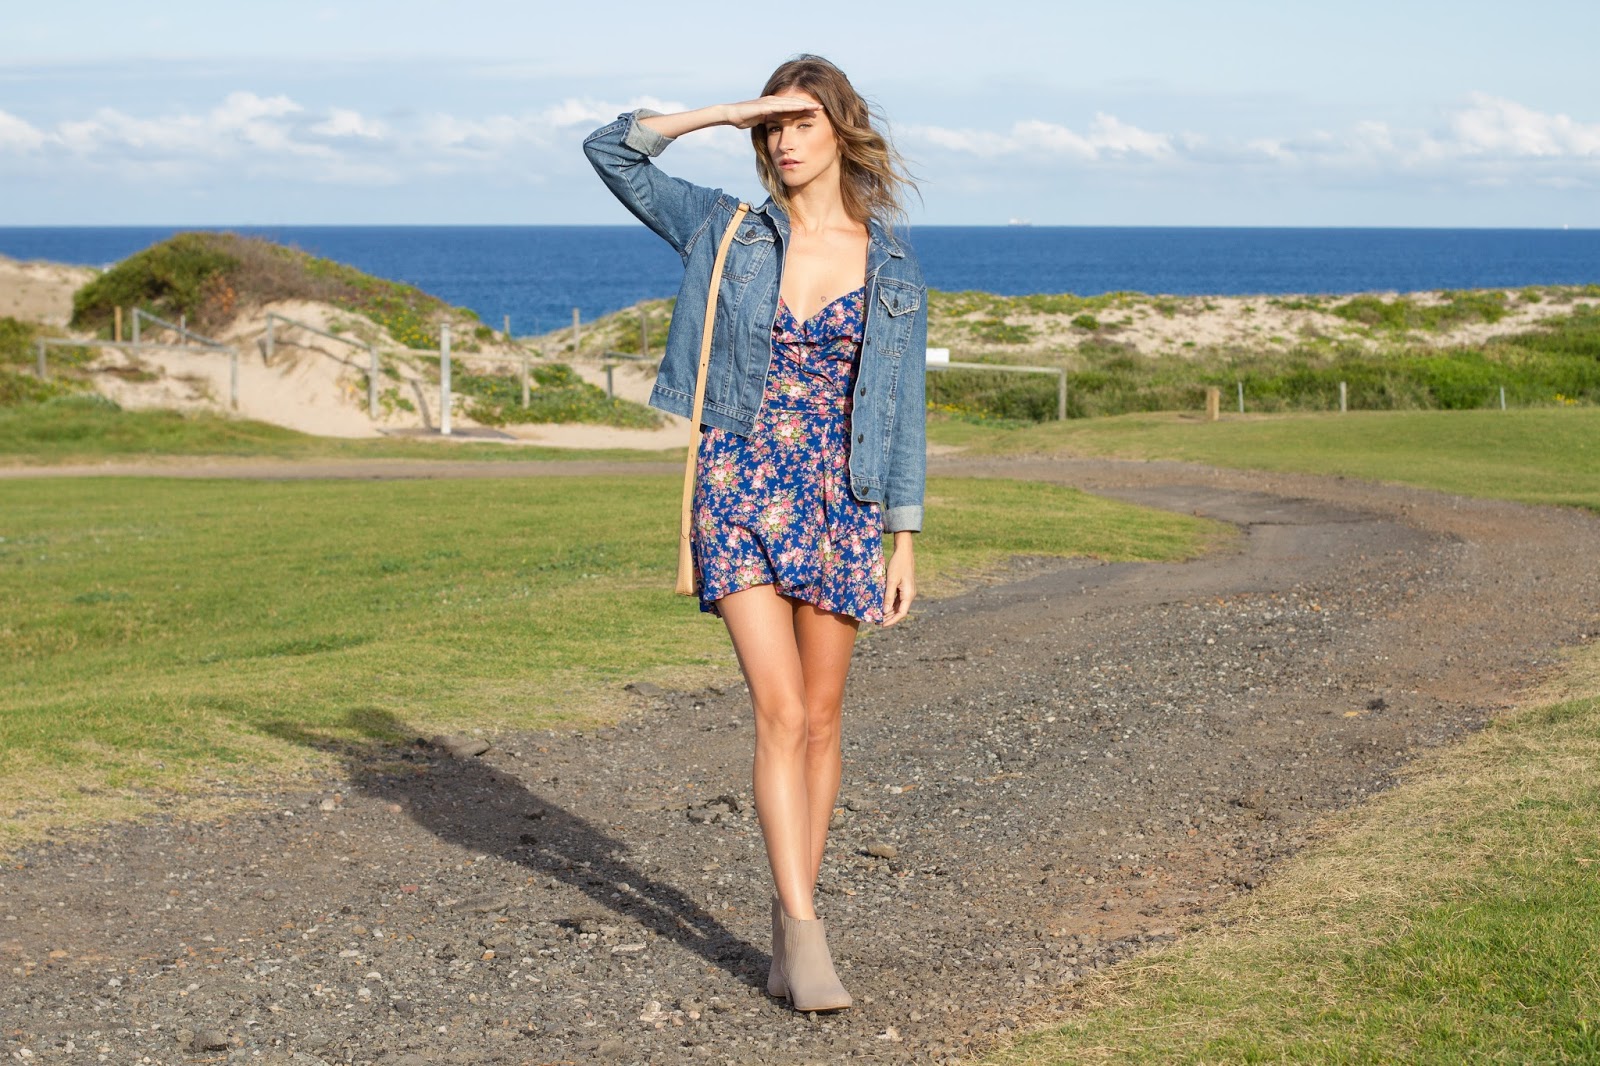 fashion blogger and designer, Alison Hutchinson, is wearing a KAYVALYA blue floral wrap dress, Topshop denim jacket, and Witchery nude suede ankle boots